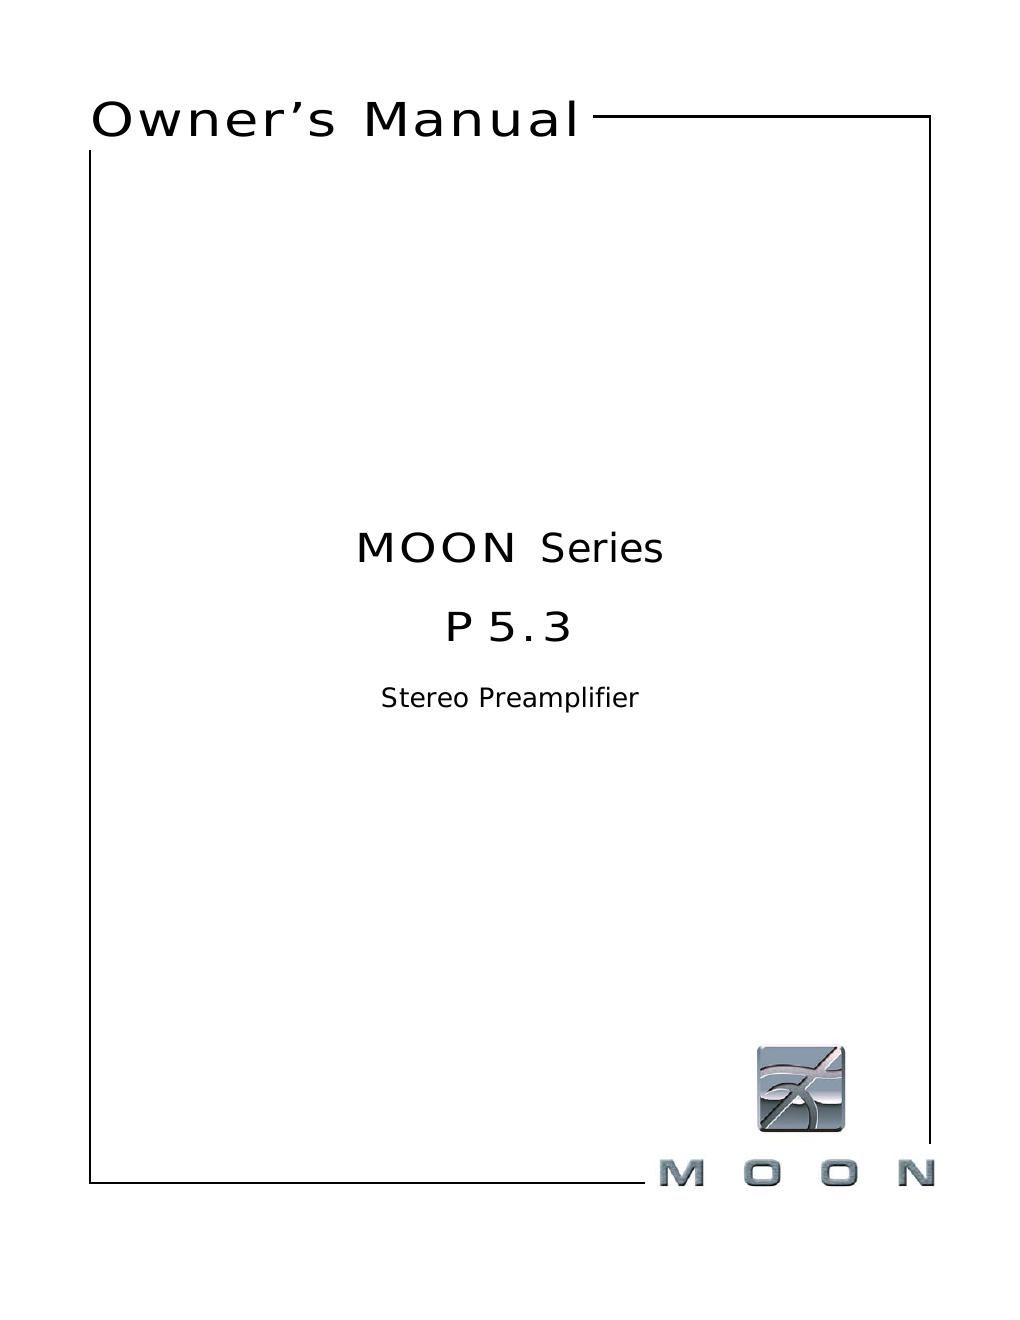 moon p 5 3 owners manual